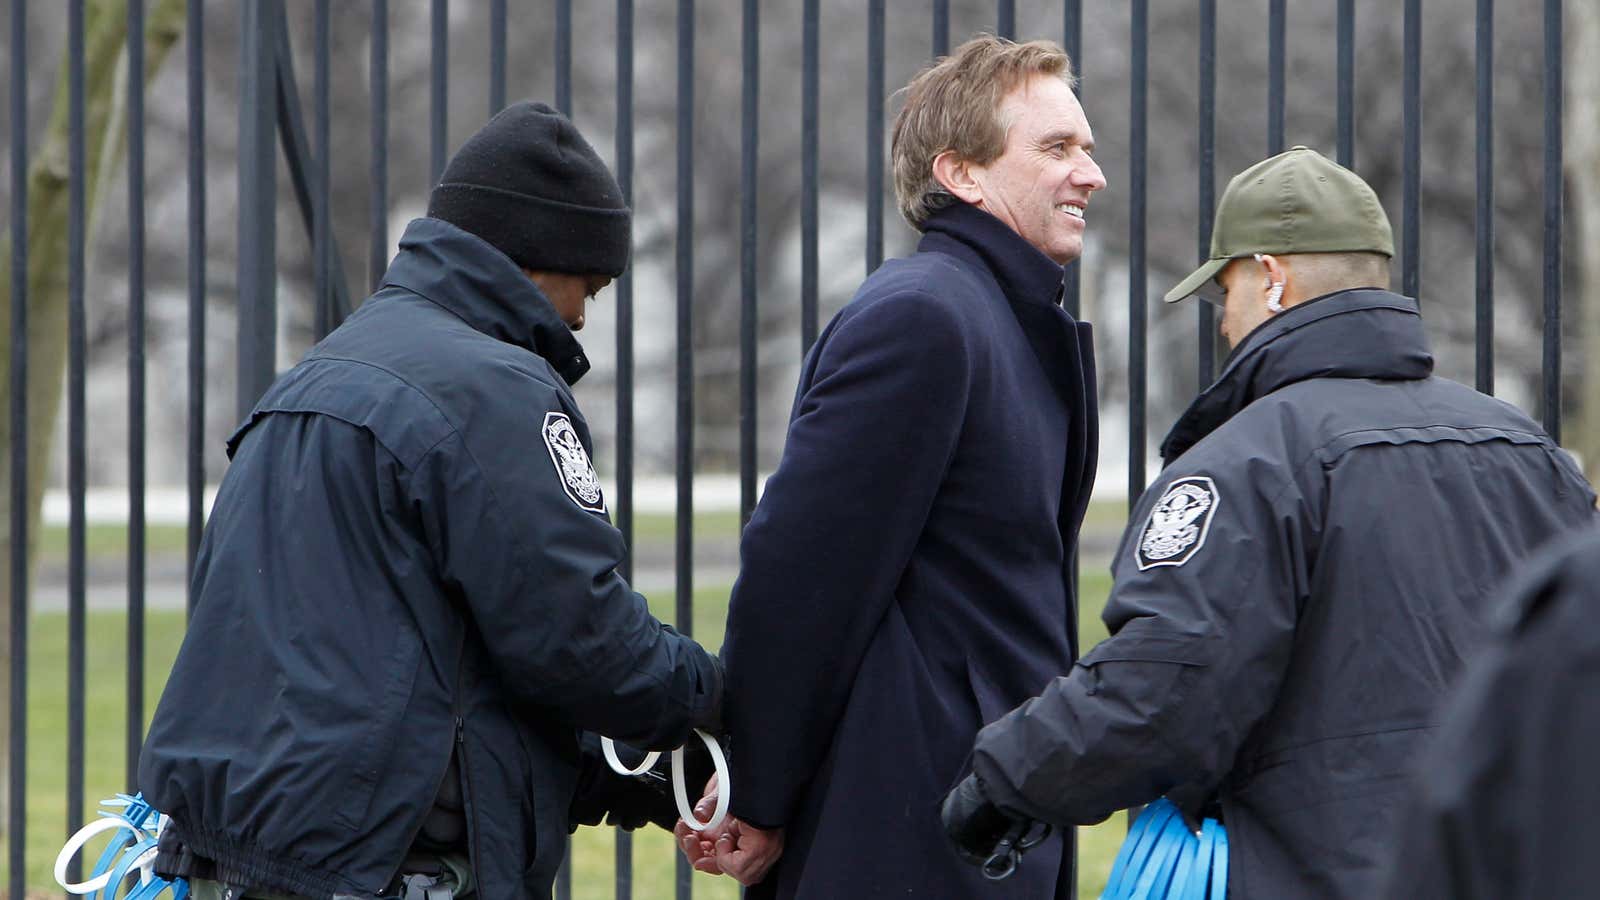 Robert F. Kennedy Jr. is arrested in front of the White House on Feb. 13, 2013, for protesting against the Keystone XL oil pipeline.